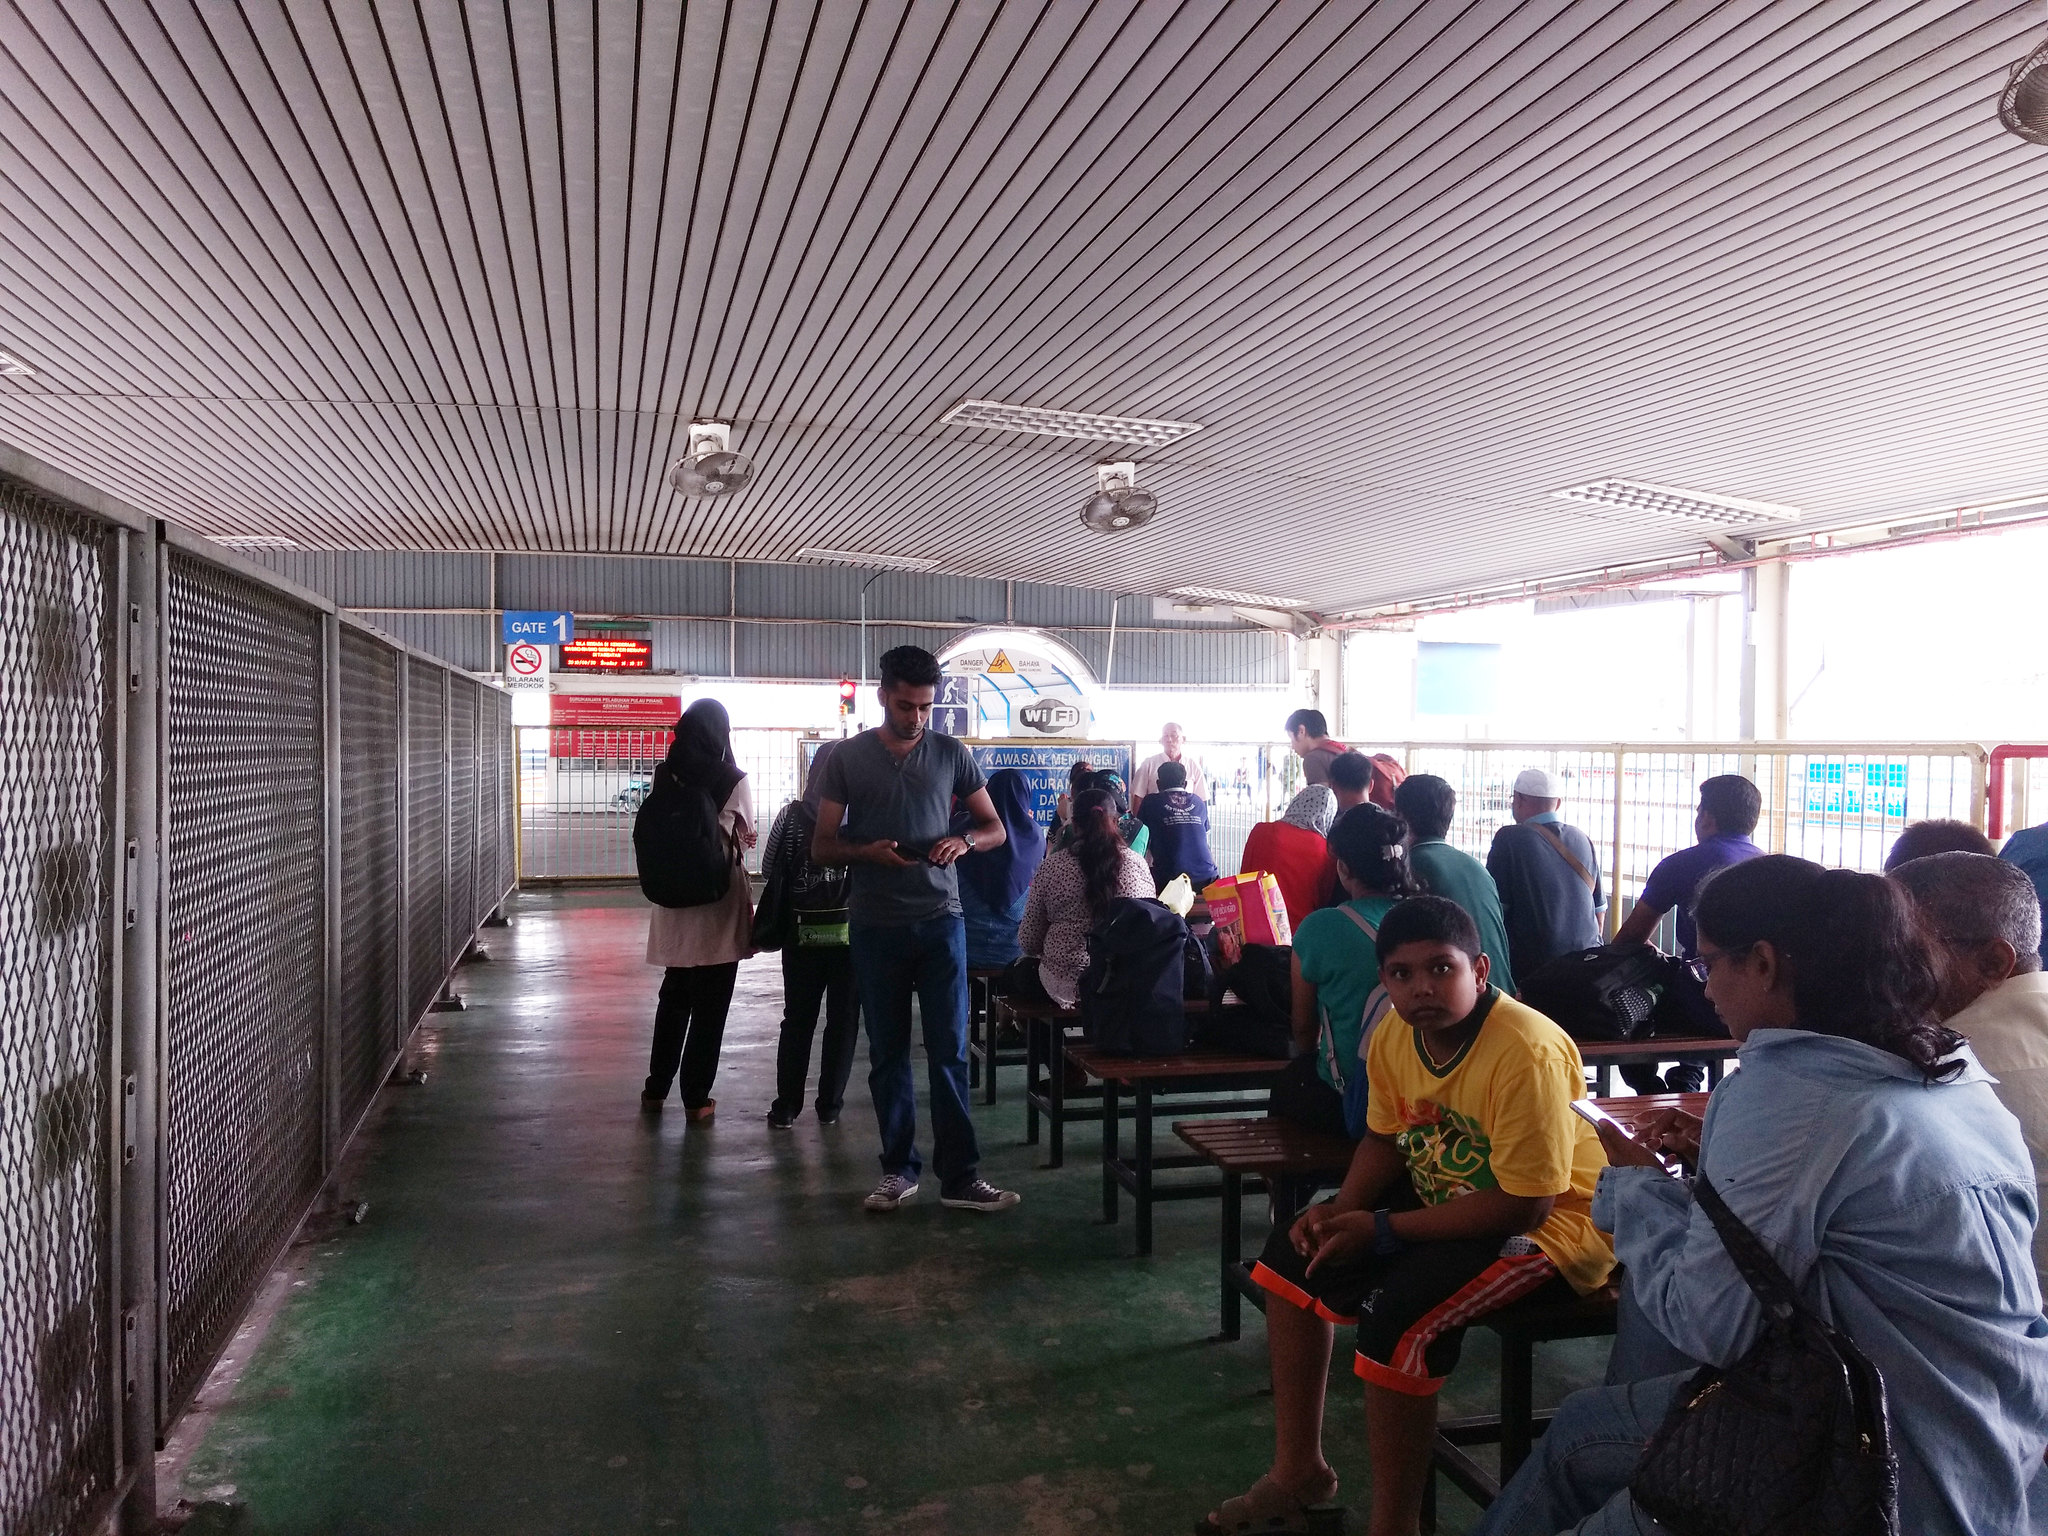 The seating area inside the ferry - Butterworth, Penang